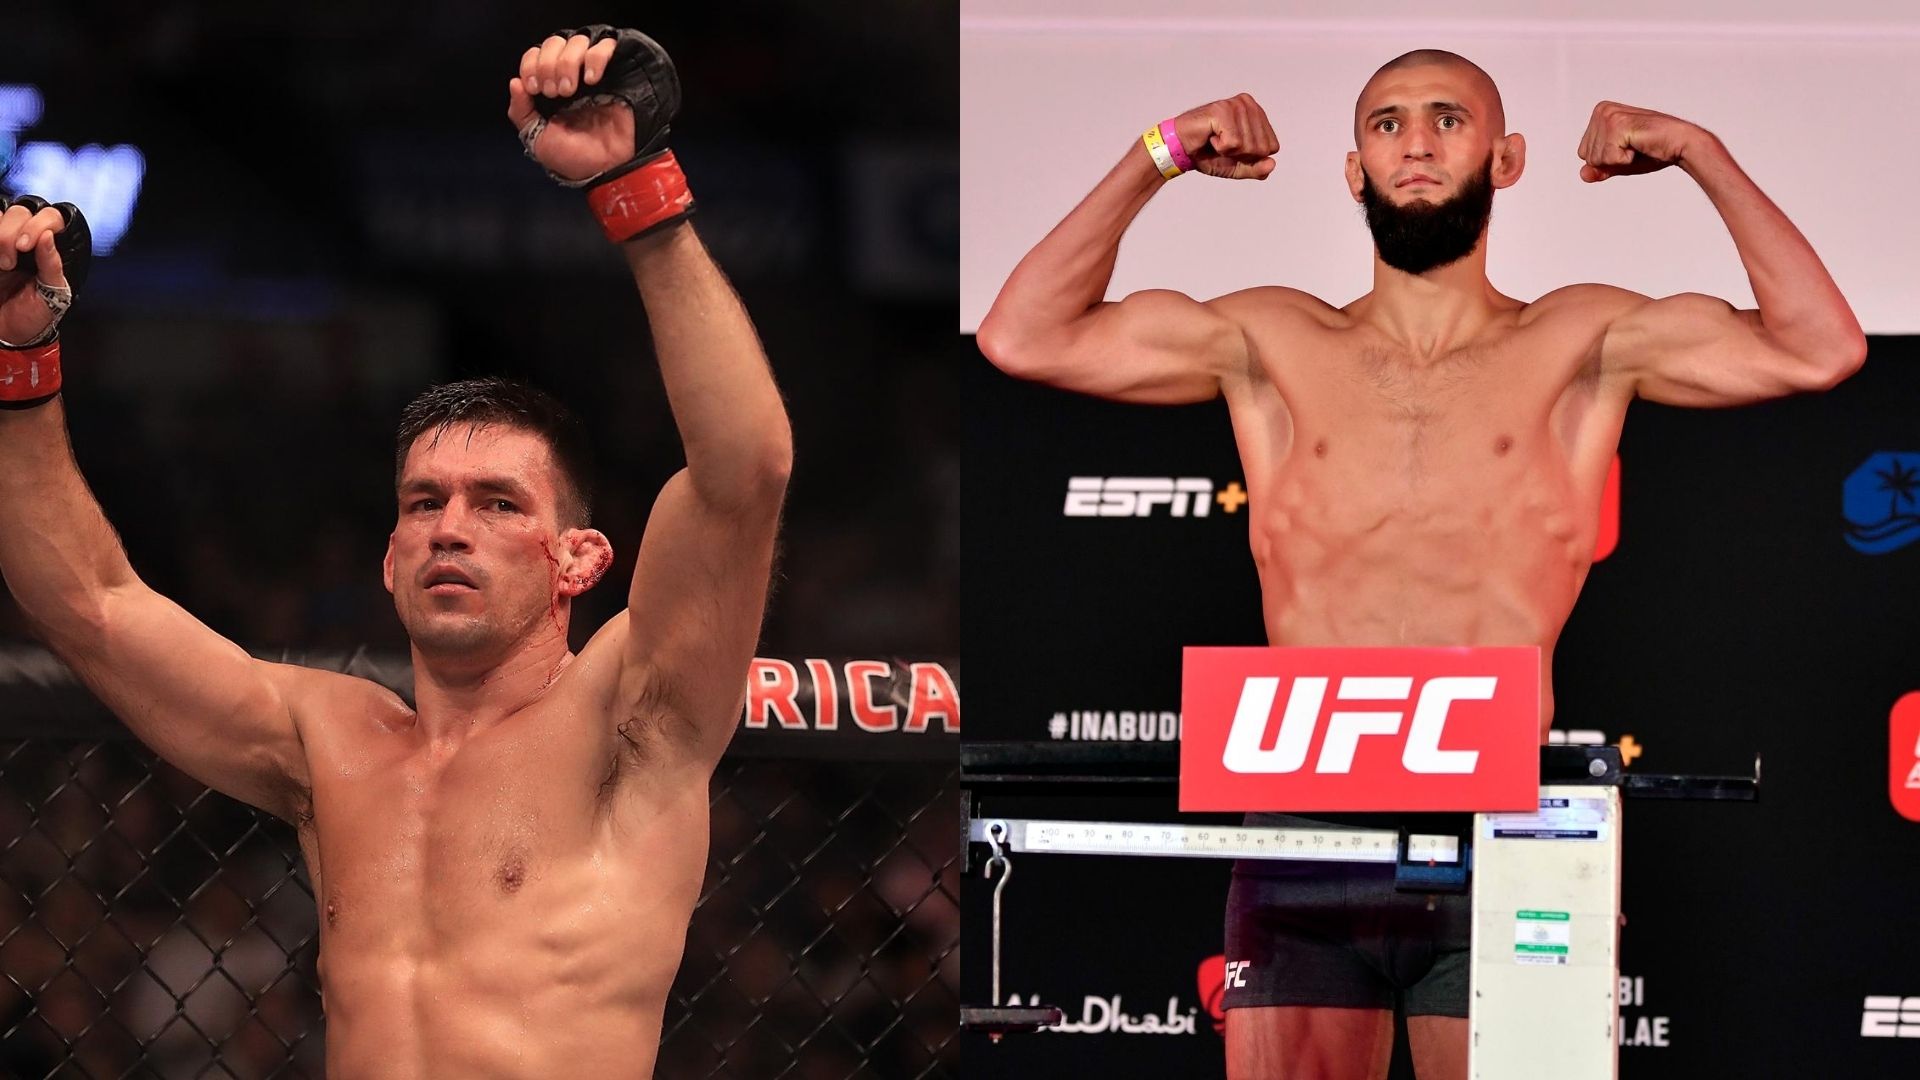 Khamzat Chimaev wants to face Demian Maia in his next UFC fight